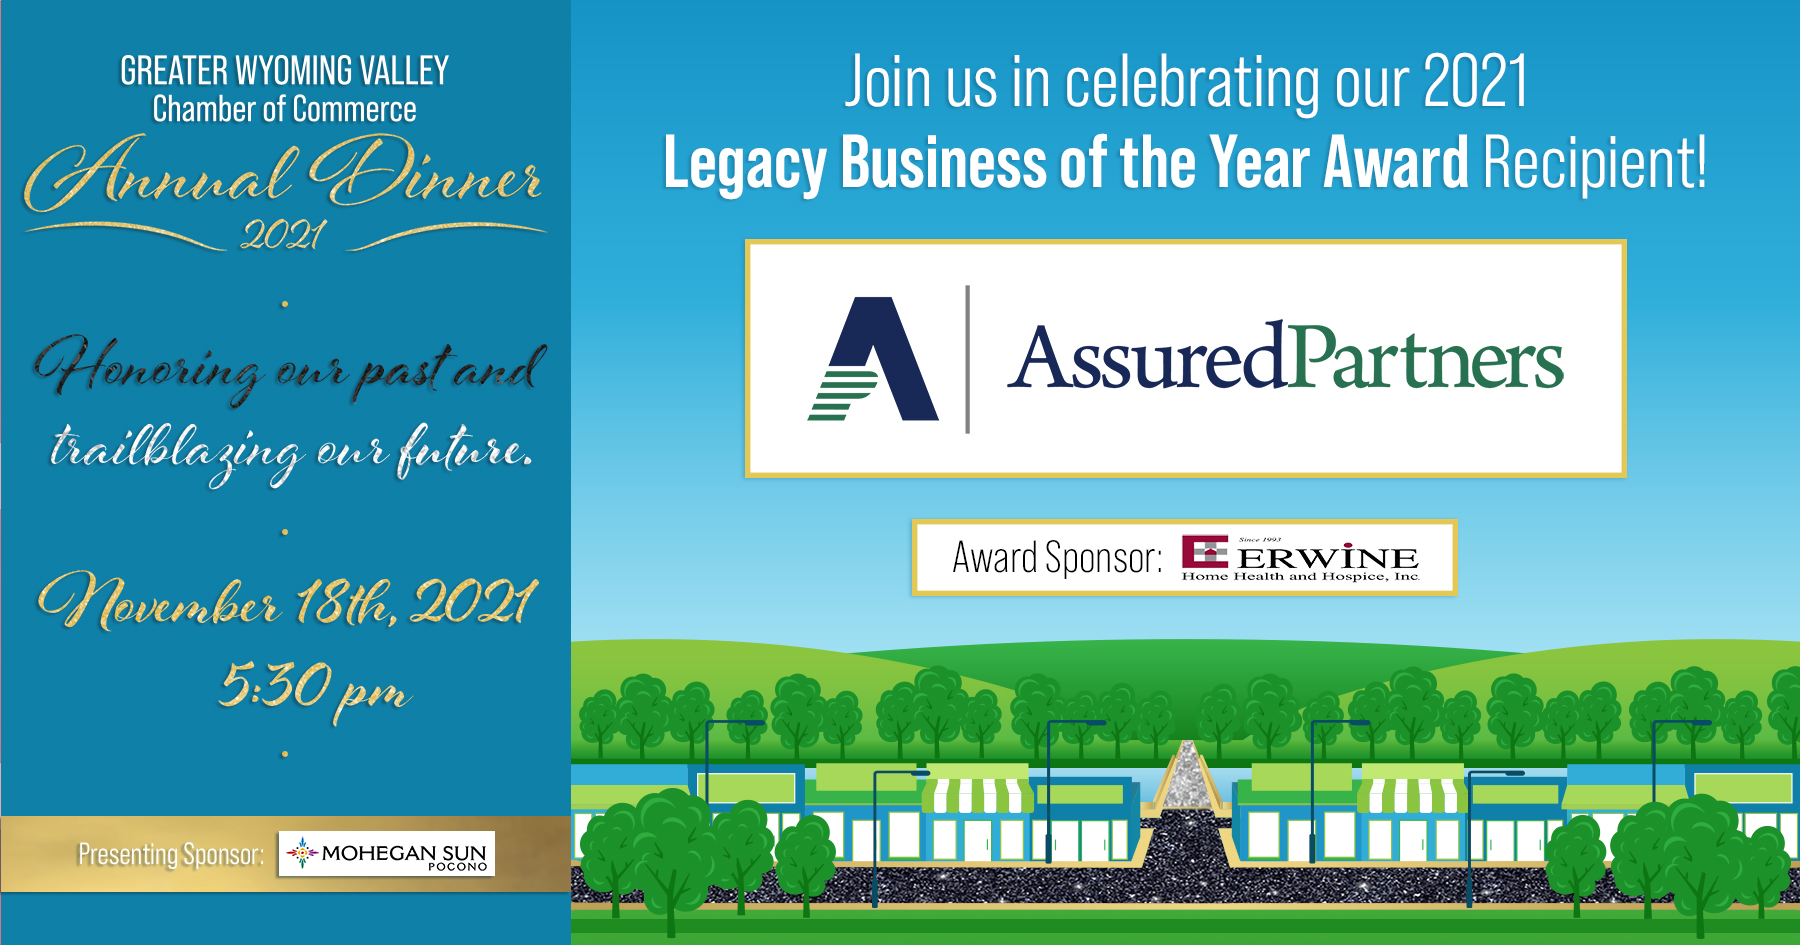 Image for Meet Our 2021 Legacy Business of the Year Award Recipient: AssuredPartners of Northeastern Pennsylvania!